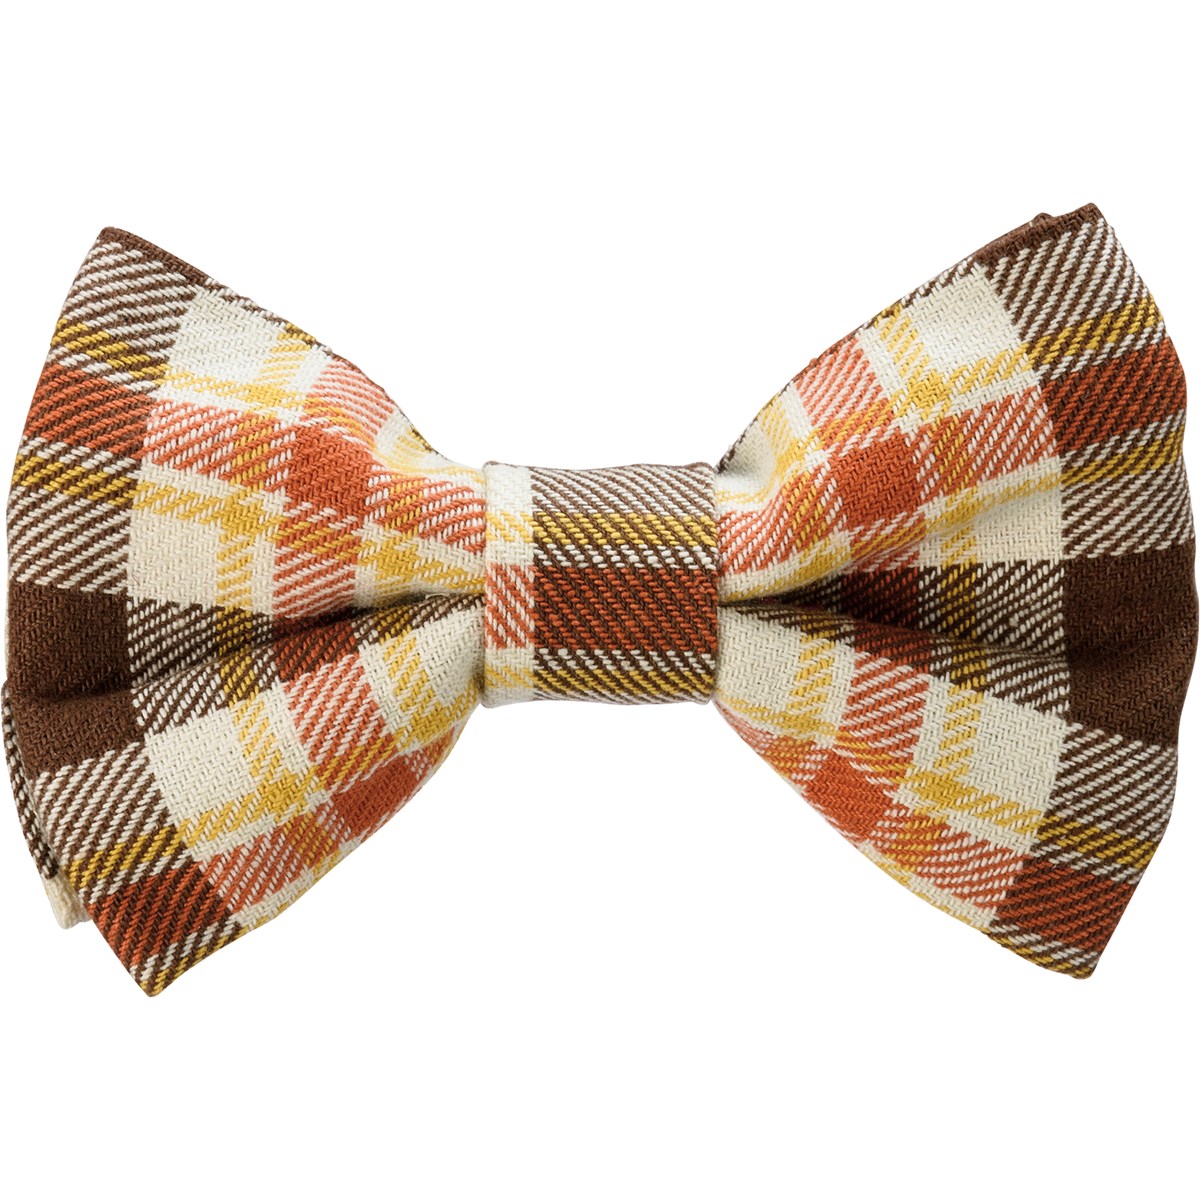 Pet Bow Tie Set Lg - Fall Plaid - 5.50" x 3.50" x 2" - Cotton, Hook-and-Loop Fastener